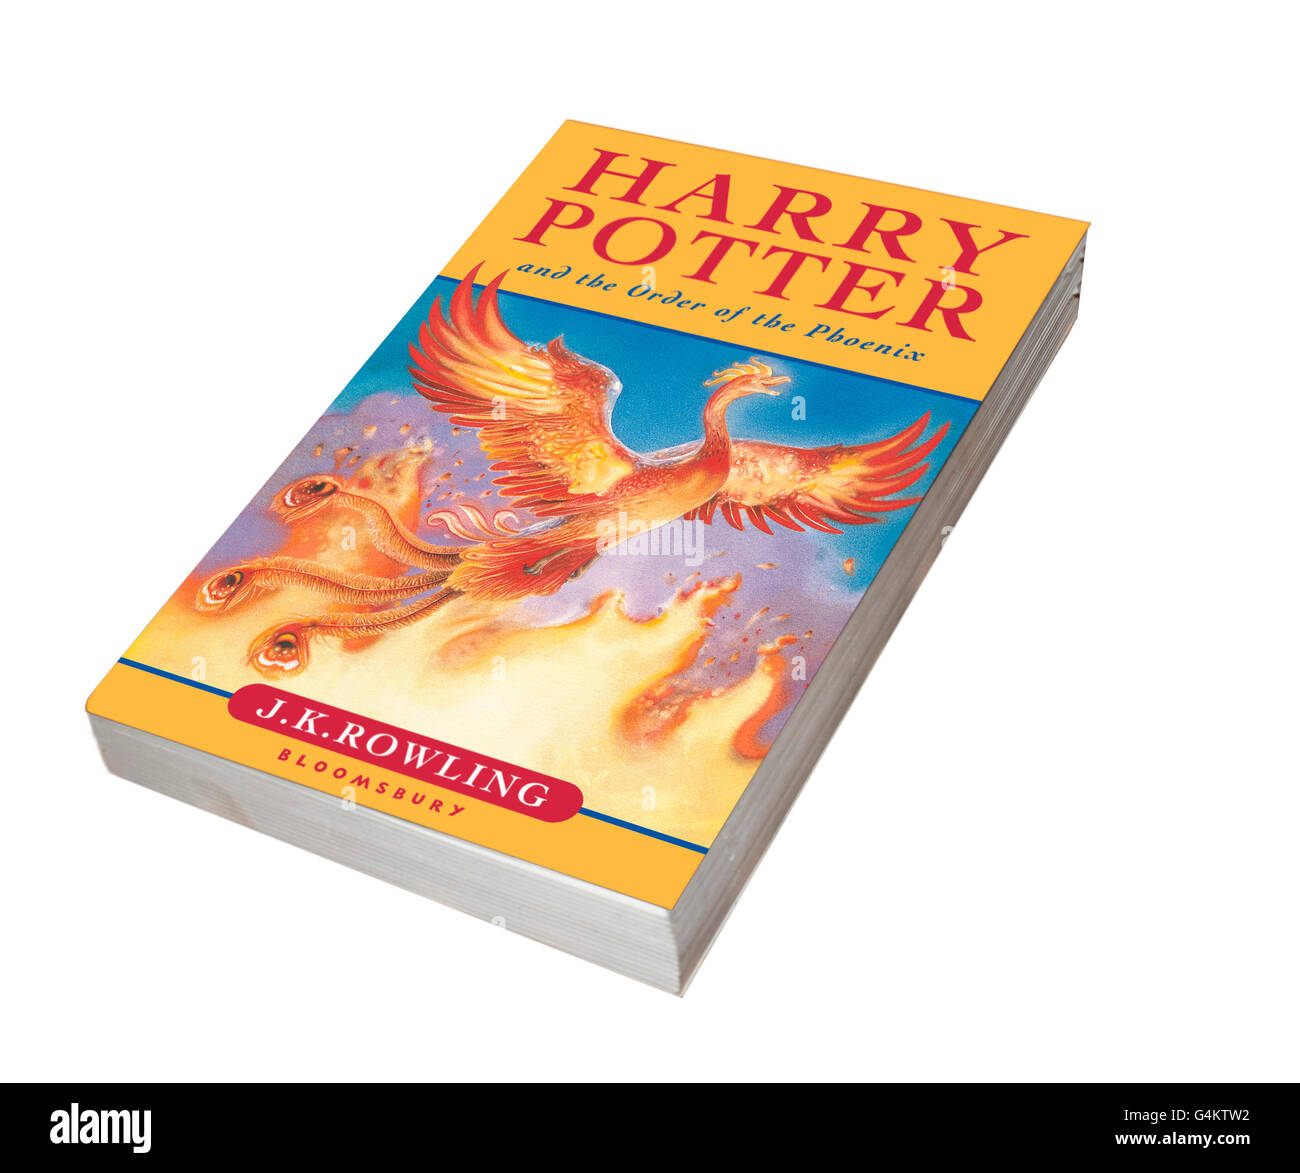 Harry Potter series book -  Harry Potter and the Order of the Phoenix Stock Photo